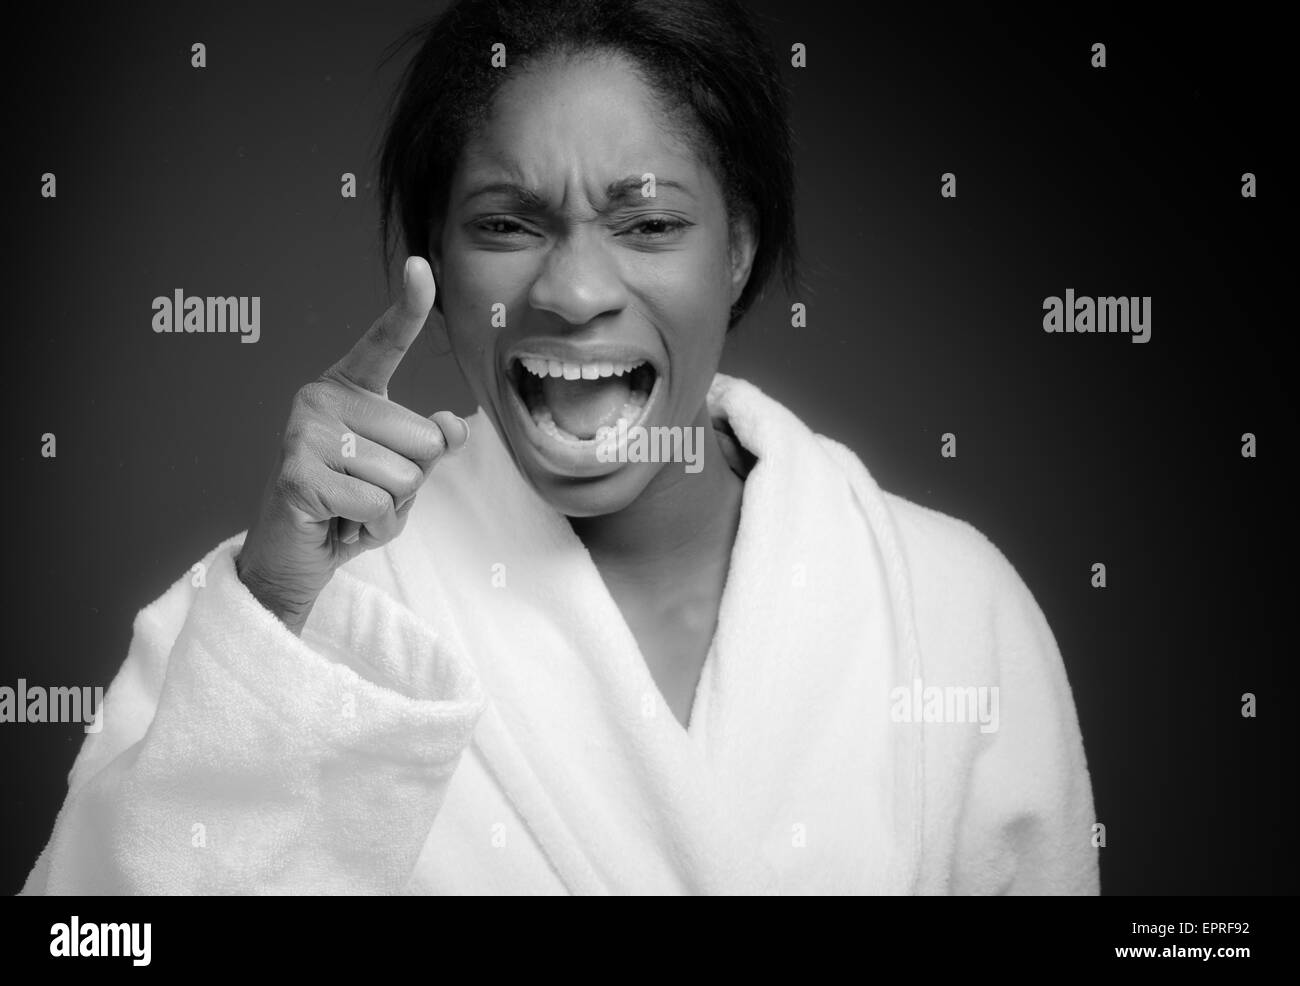 Model angry scolding and pointing Stock Photo